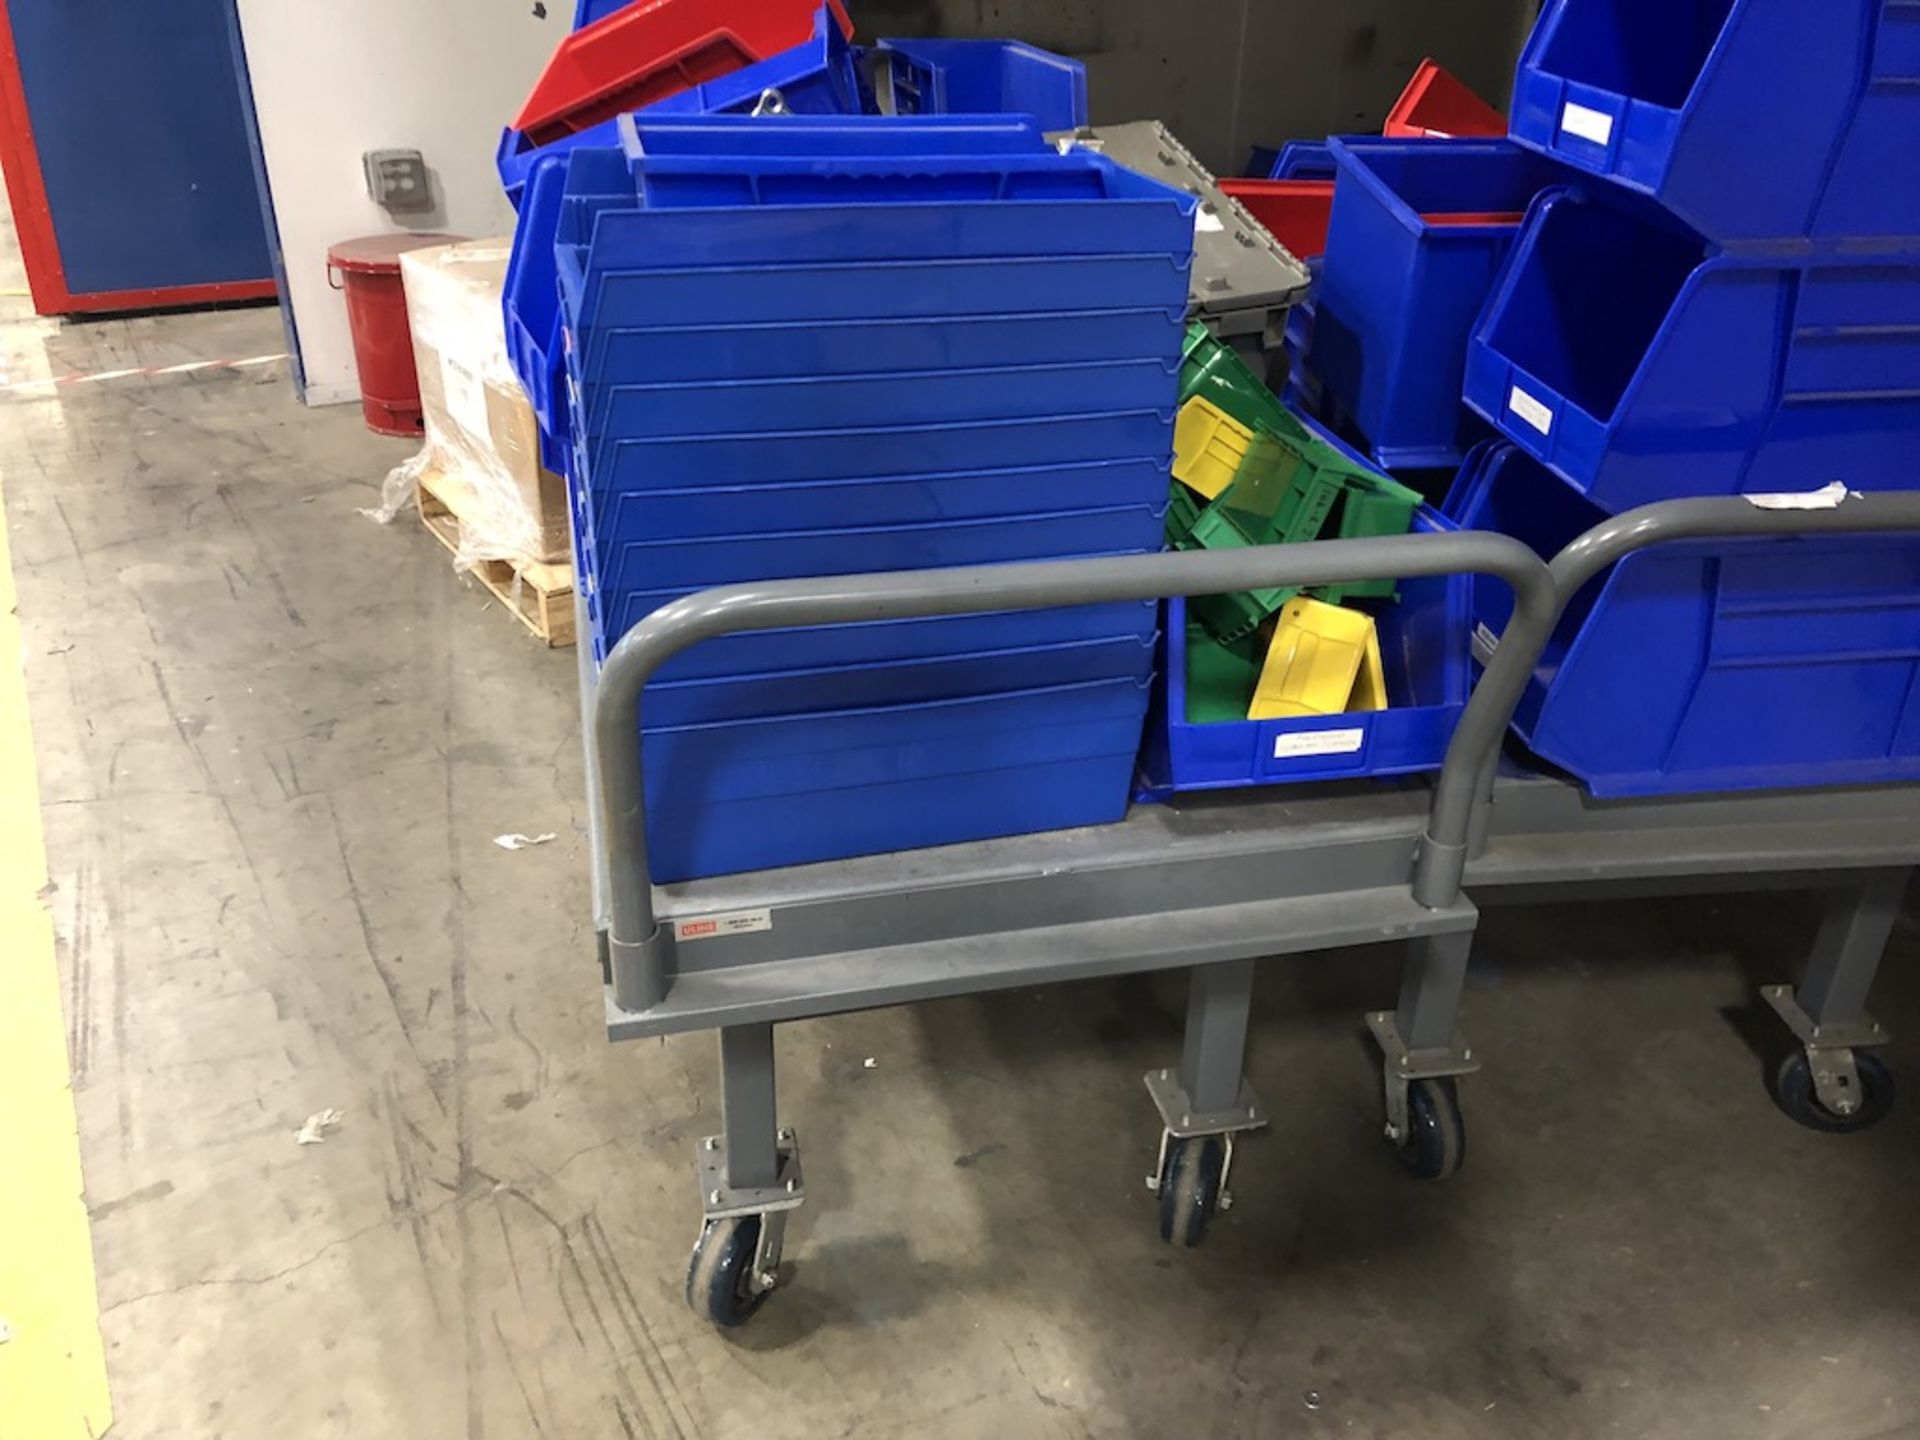 ULINE STEEL PLATFORM CART ( CONTENTS NOT INCLUDED ) 64IN L X 30 IN W X 37 IN H - Image 4 of 9